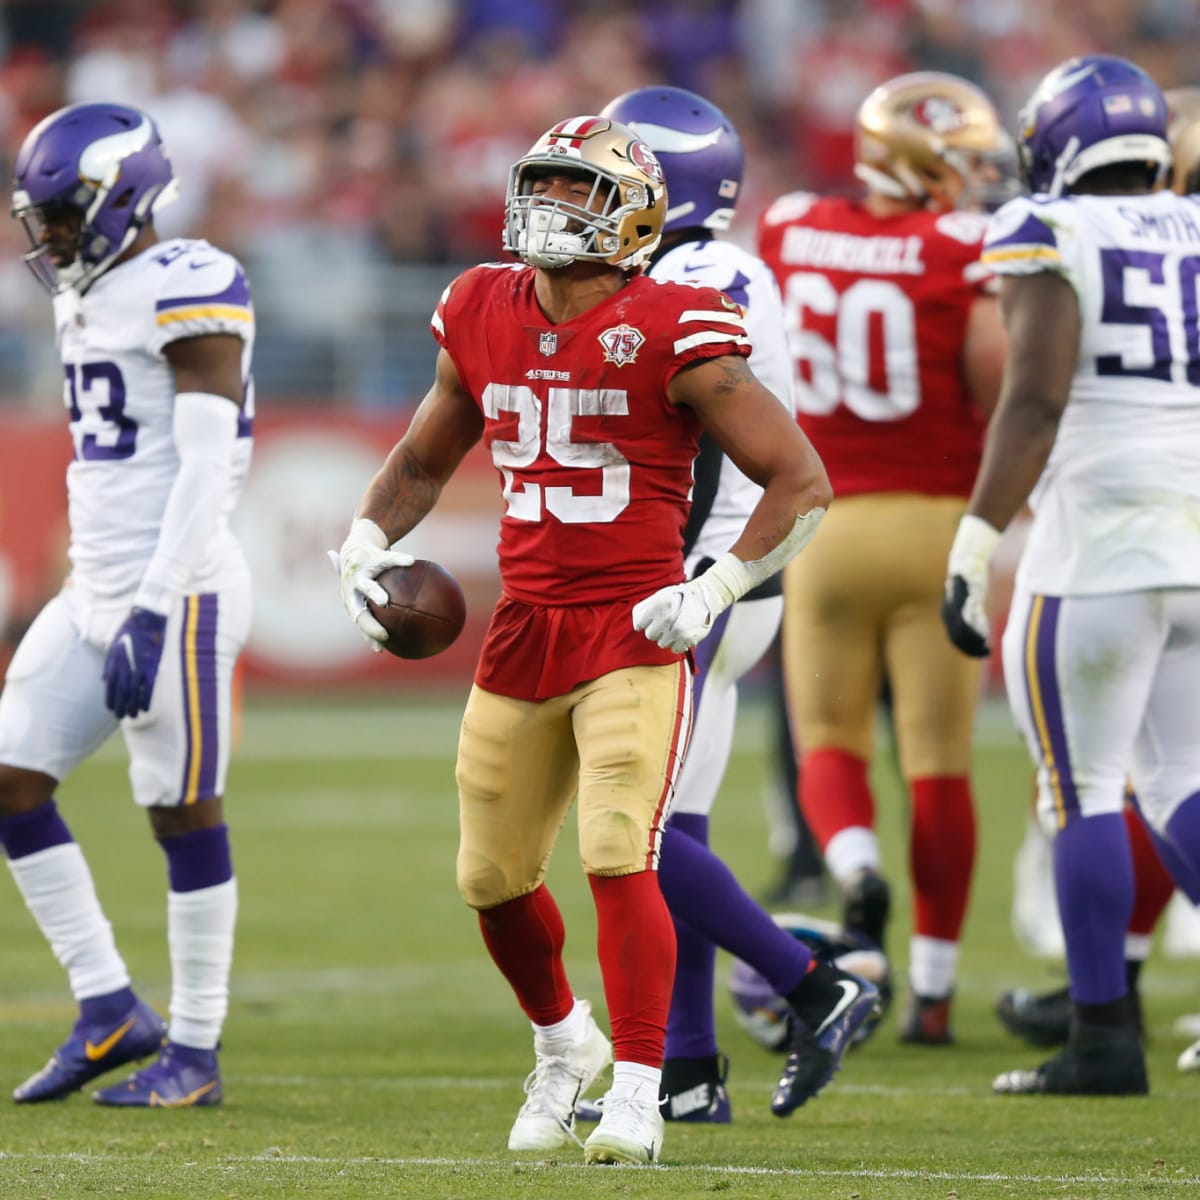 Elijah Mitchell Viewed As Top Running Back: NFL World Reacts - The